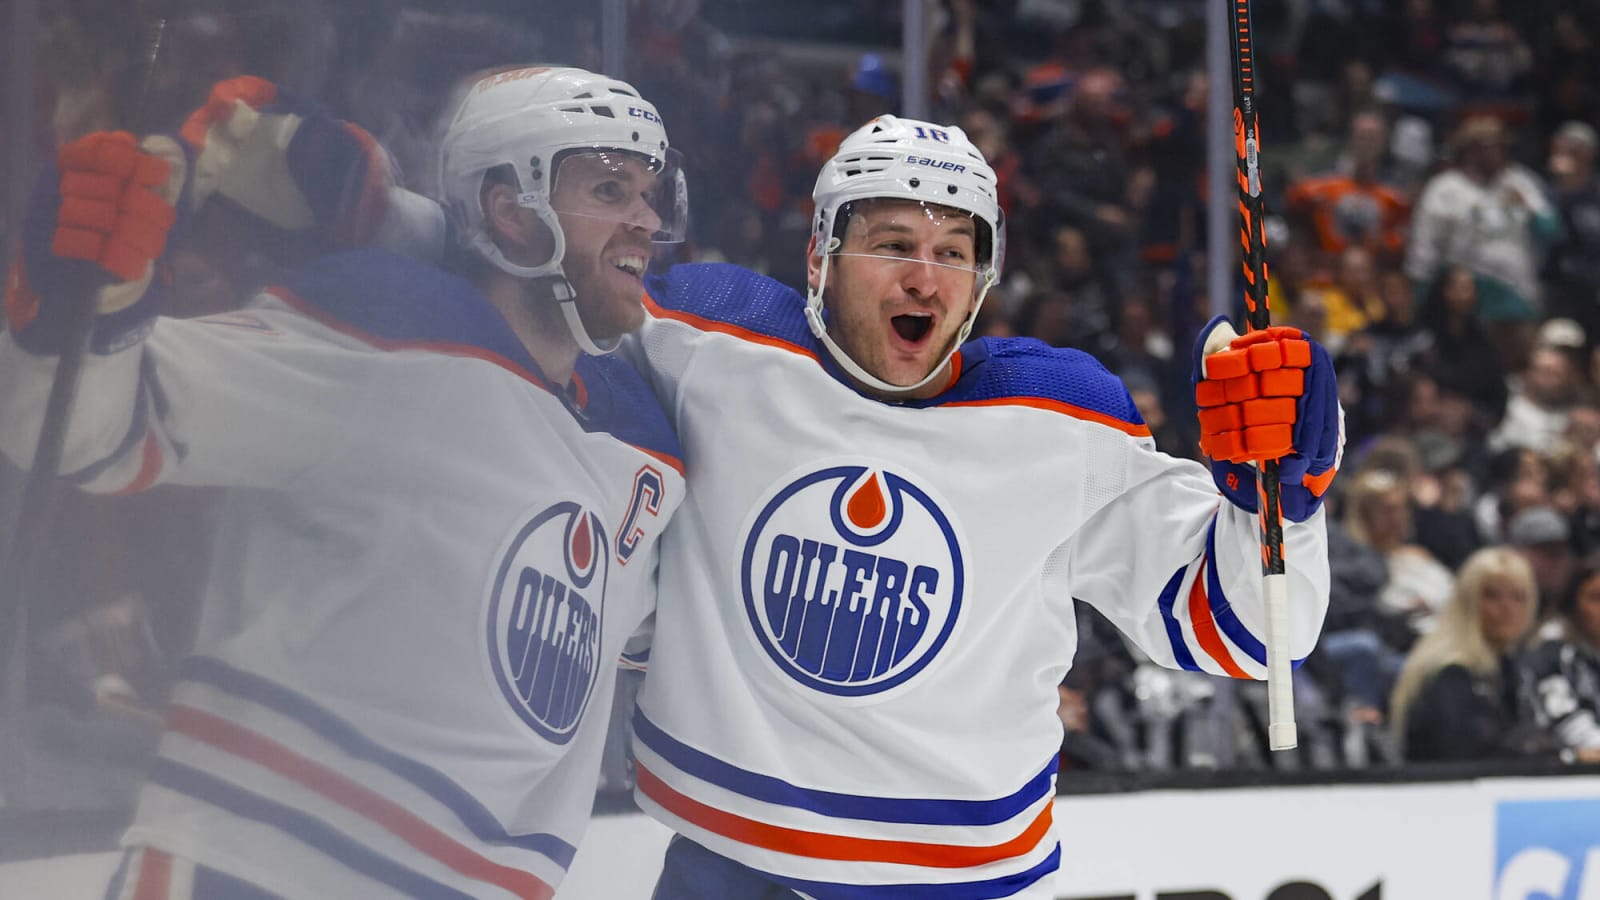 Oilers’ 3 Most Incredible Stats From Game 3 Win vs. Kings